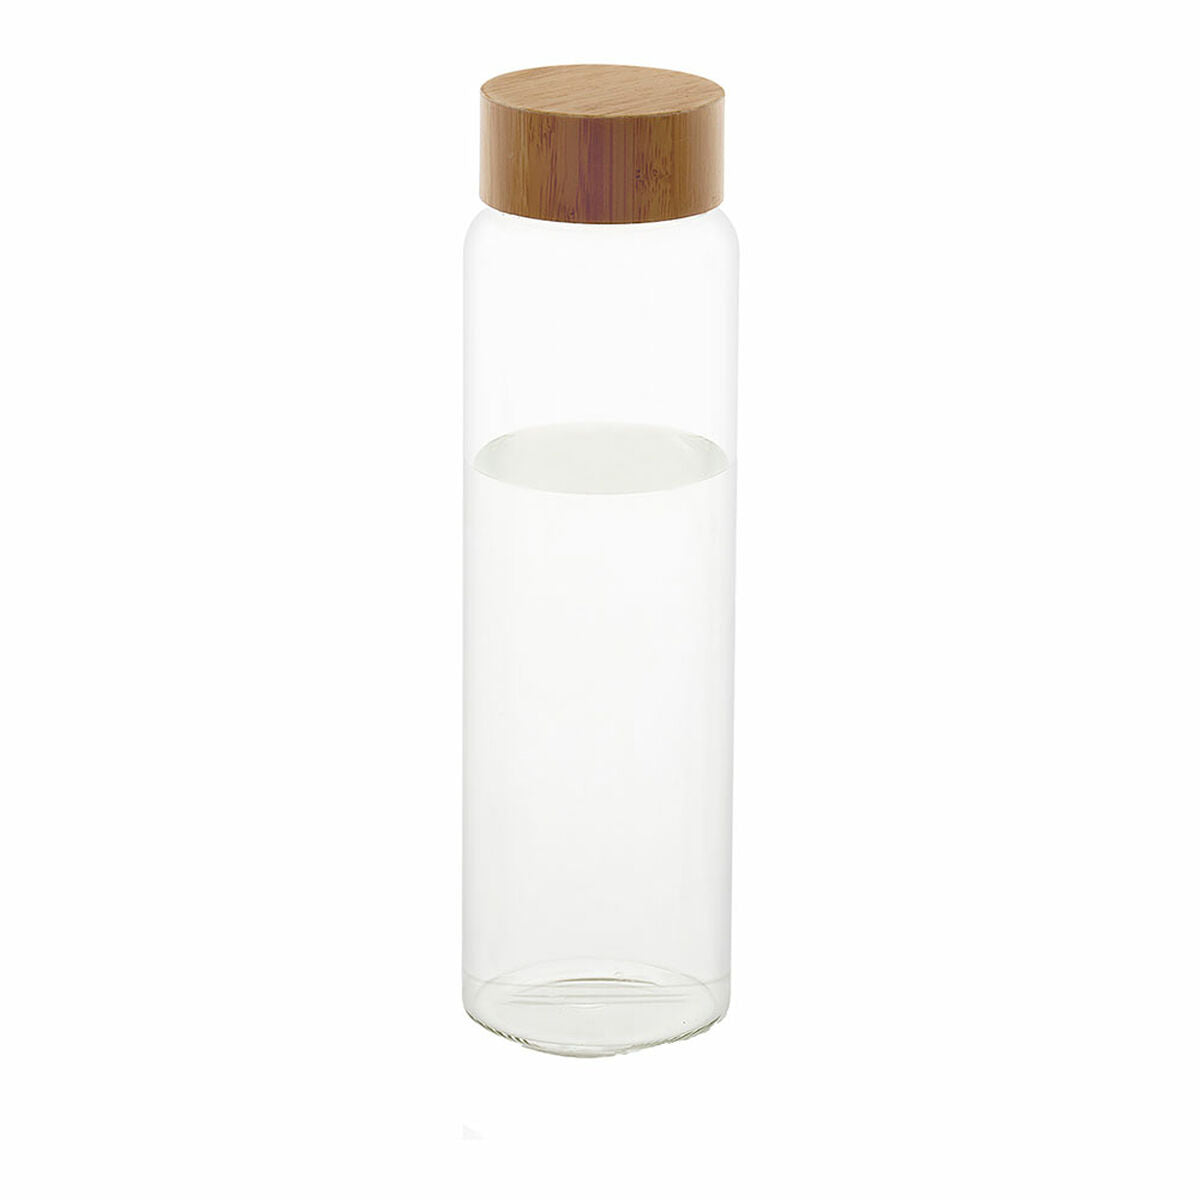 Bottle Andrea House ms70099 Glass Bamboo 1 L